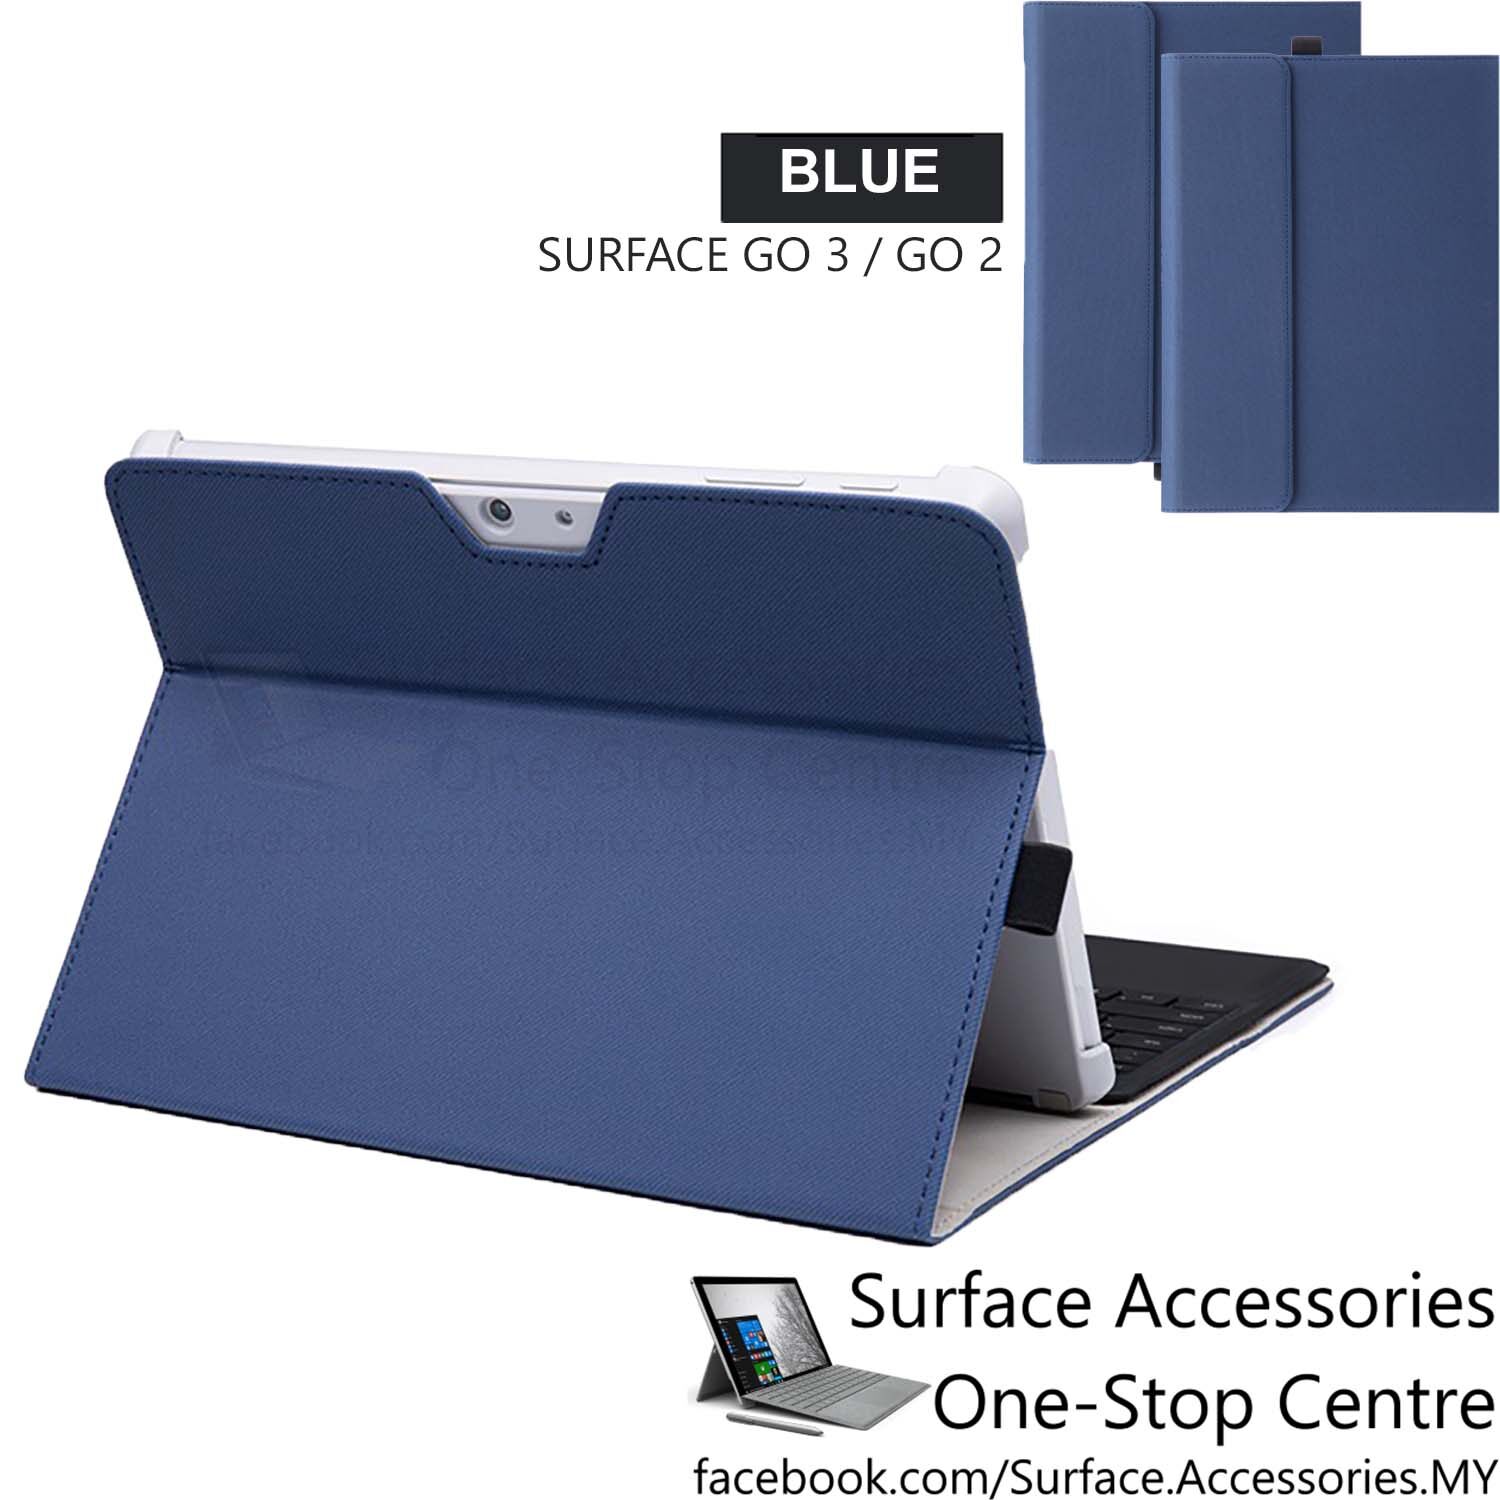 [MALAYSIA]Microsoft Surface Go 3 Casing Surface Go 2 Casing Surface Go Casing Surface Go 3 Cover Ultimate Case Stand Flip Case Pentium Gold Case Surface Go 2 Cover Ultimate Case Stand Flip Case Pentium Gold Case Surface Go Cover Ultimate Case Stand